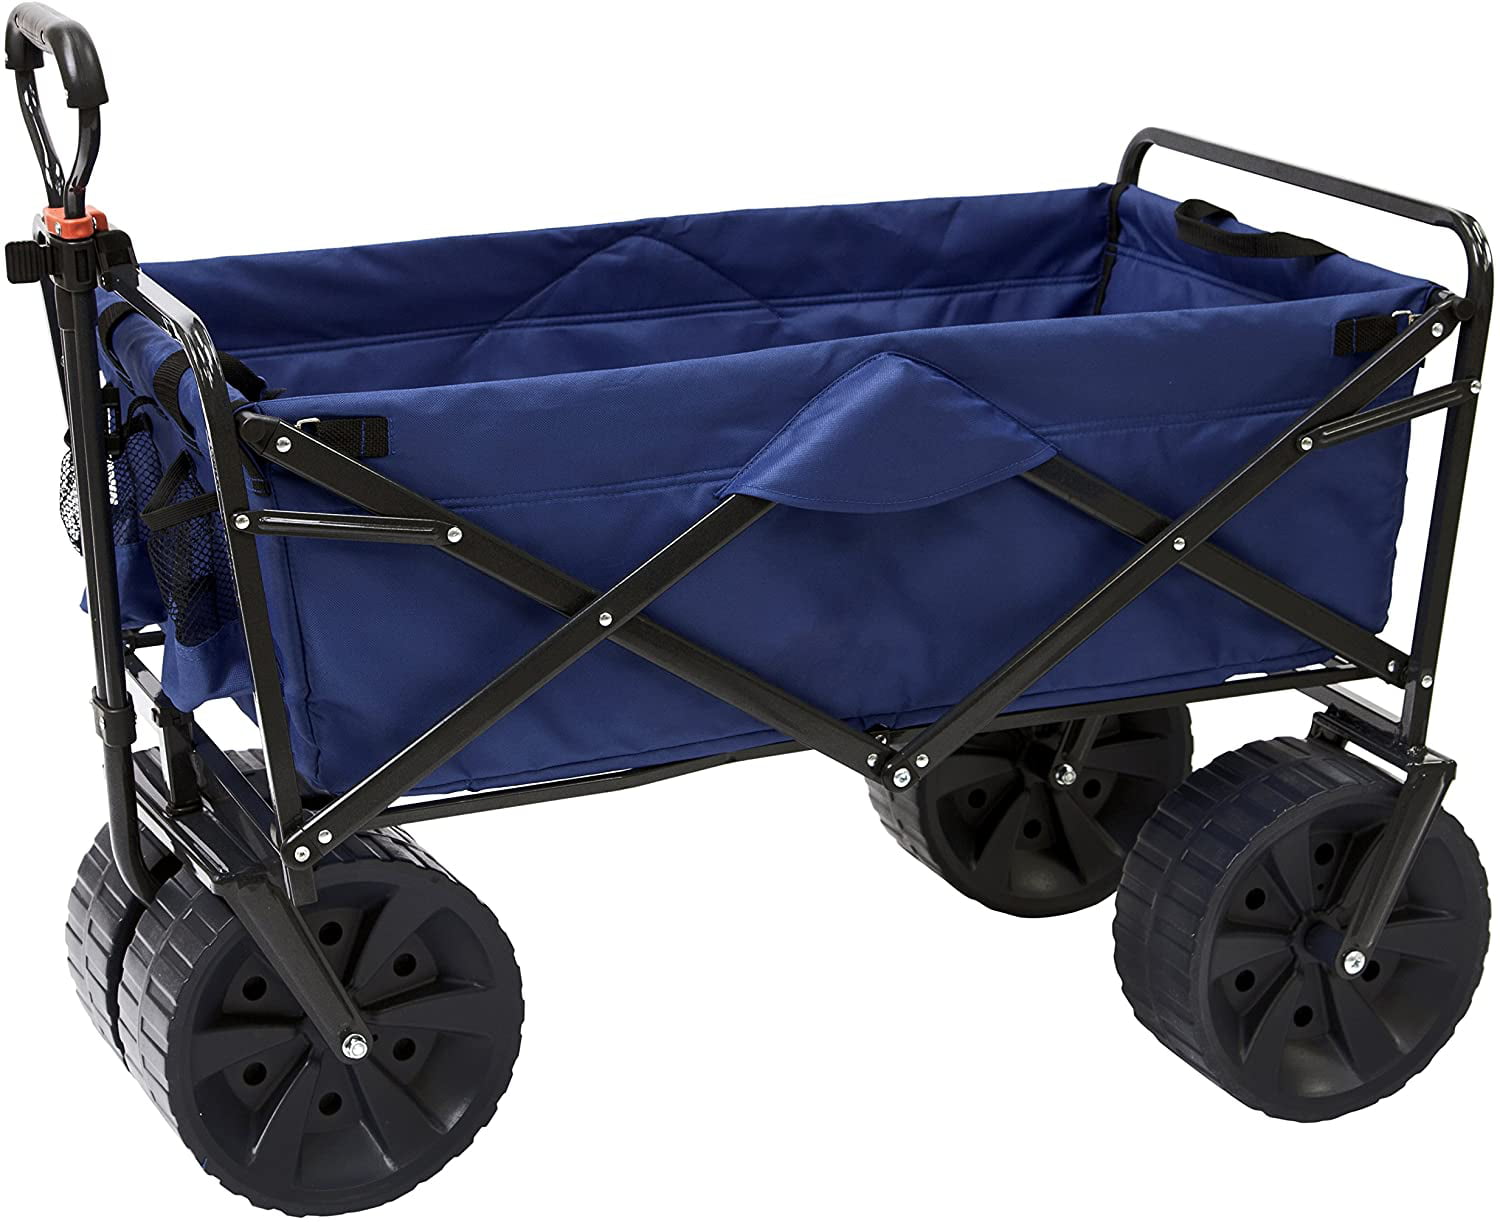 Mac Sports Heavy Duty Collapsible Folding All Terrain Utility Beach Wagon Cart with Table Red/Black 